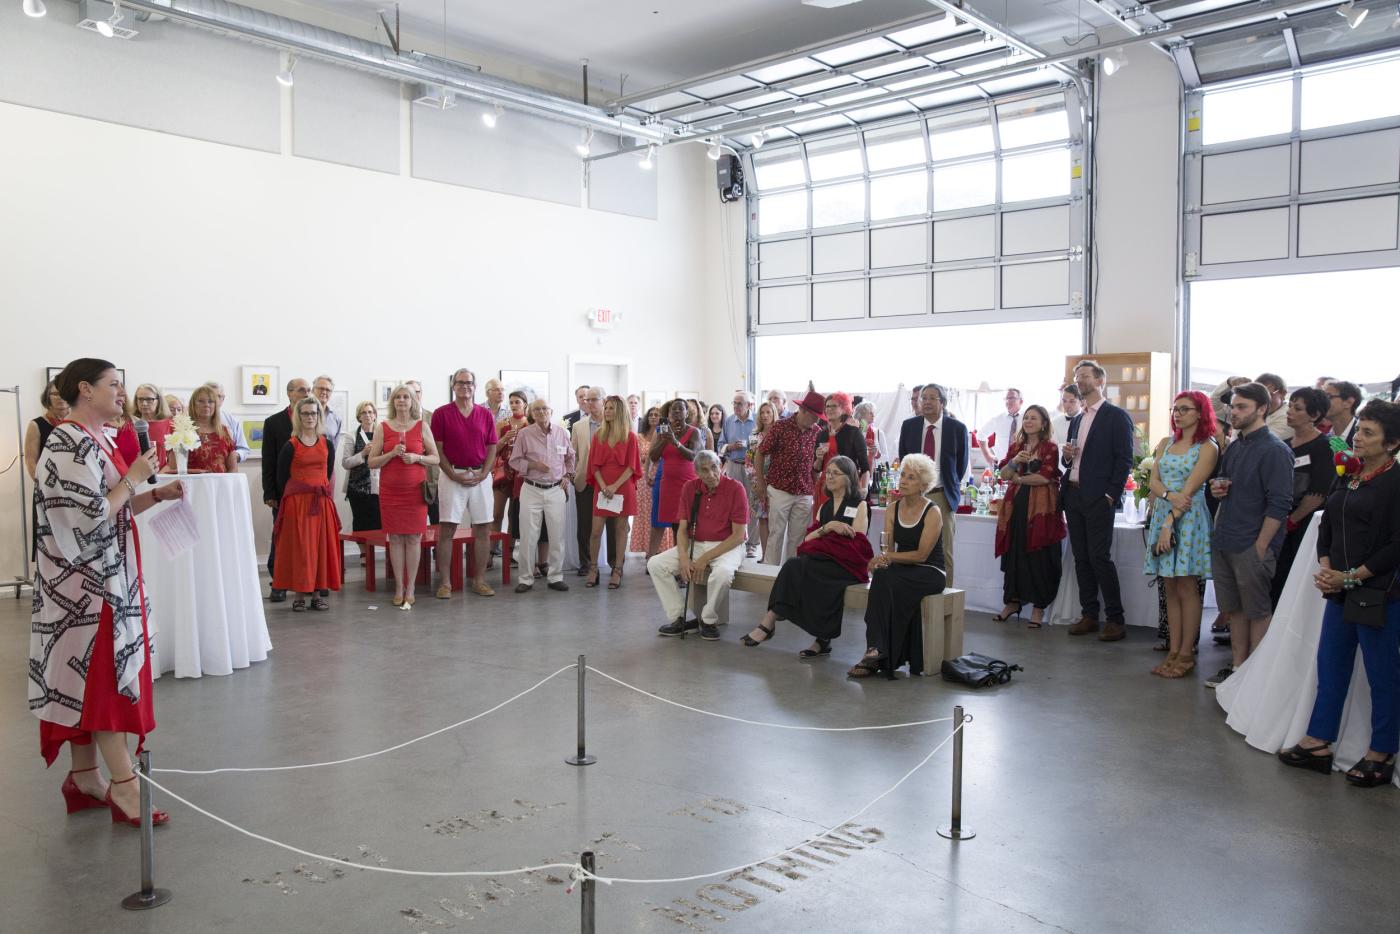 A crowd of people dressed in red and white watch a woman speak in a roped off area of a large, bright warehouse/garage